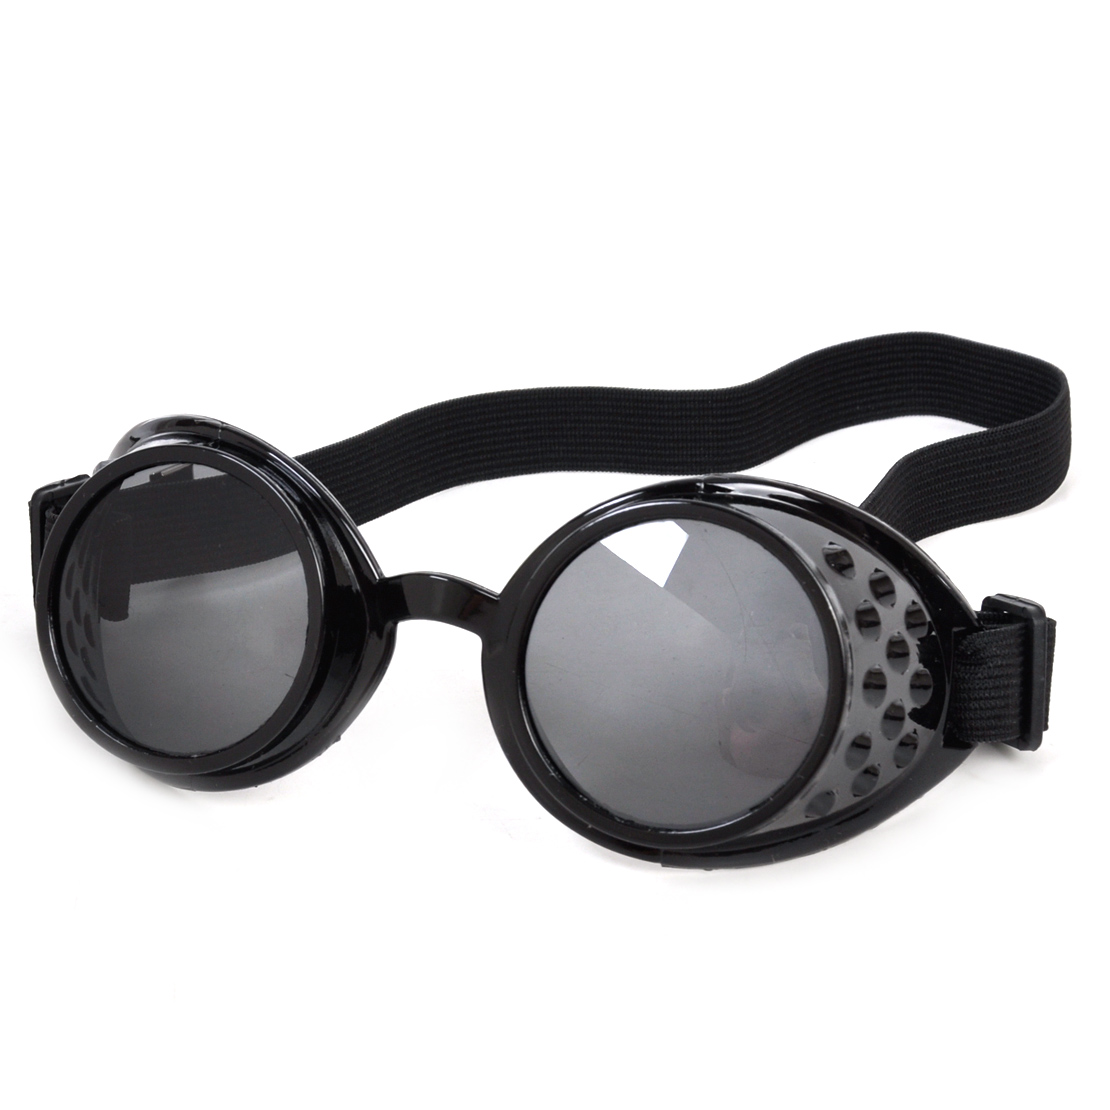 Vintage Steampunk Goggles Glasses Welding Cyber Punk Gothic Rave Lens Cosplay Ebay 